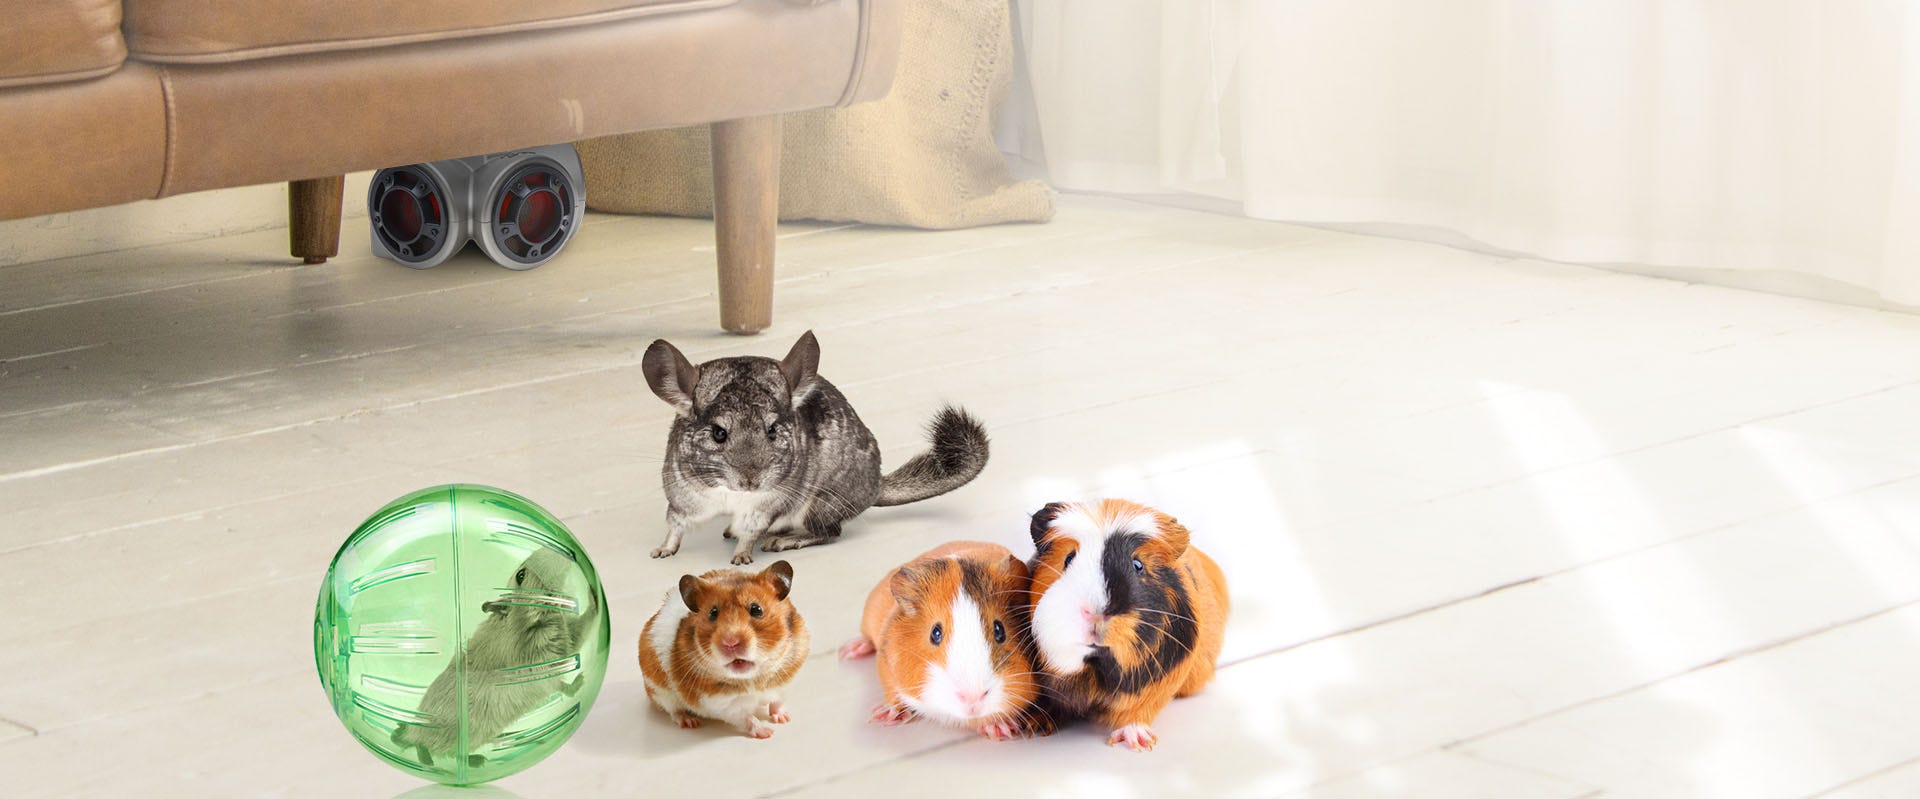 A mouse, guinea pigs, and other animals distressed from the sound made by the Pestchaser